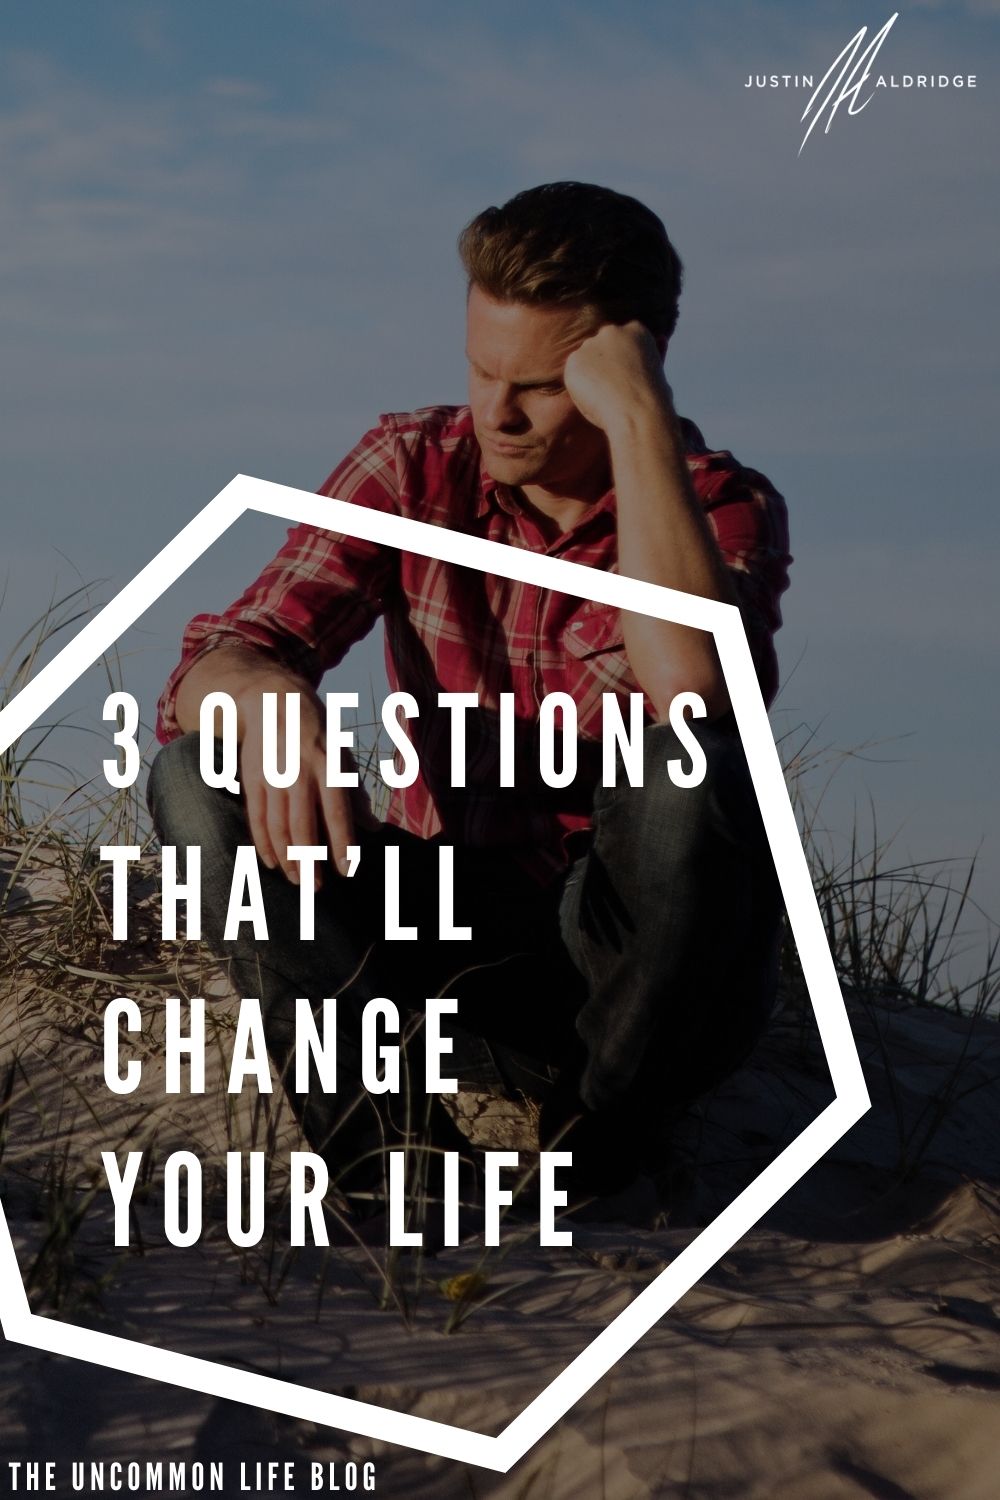 Man sitting on a log thinking in the background behind the text, "3 questions that'll change your life"